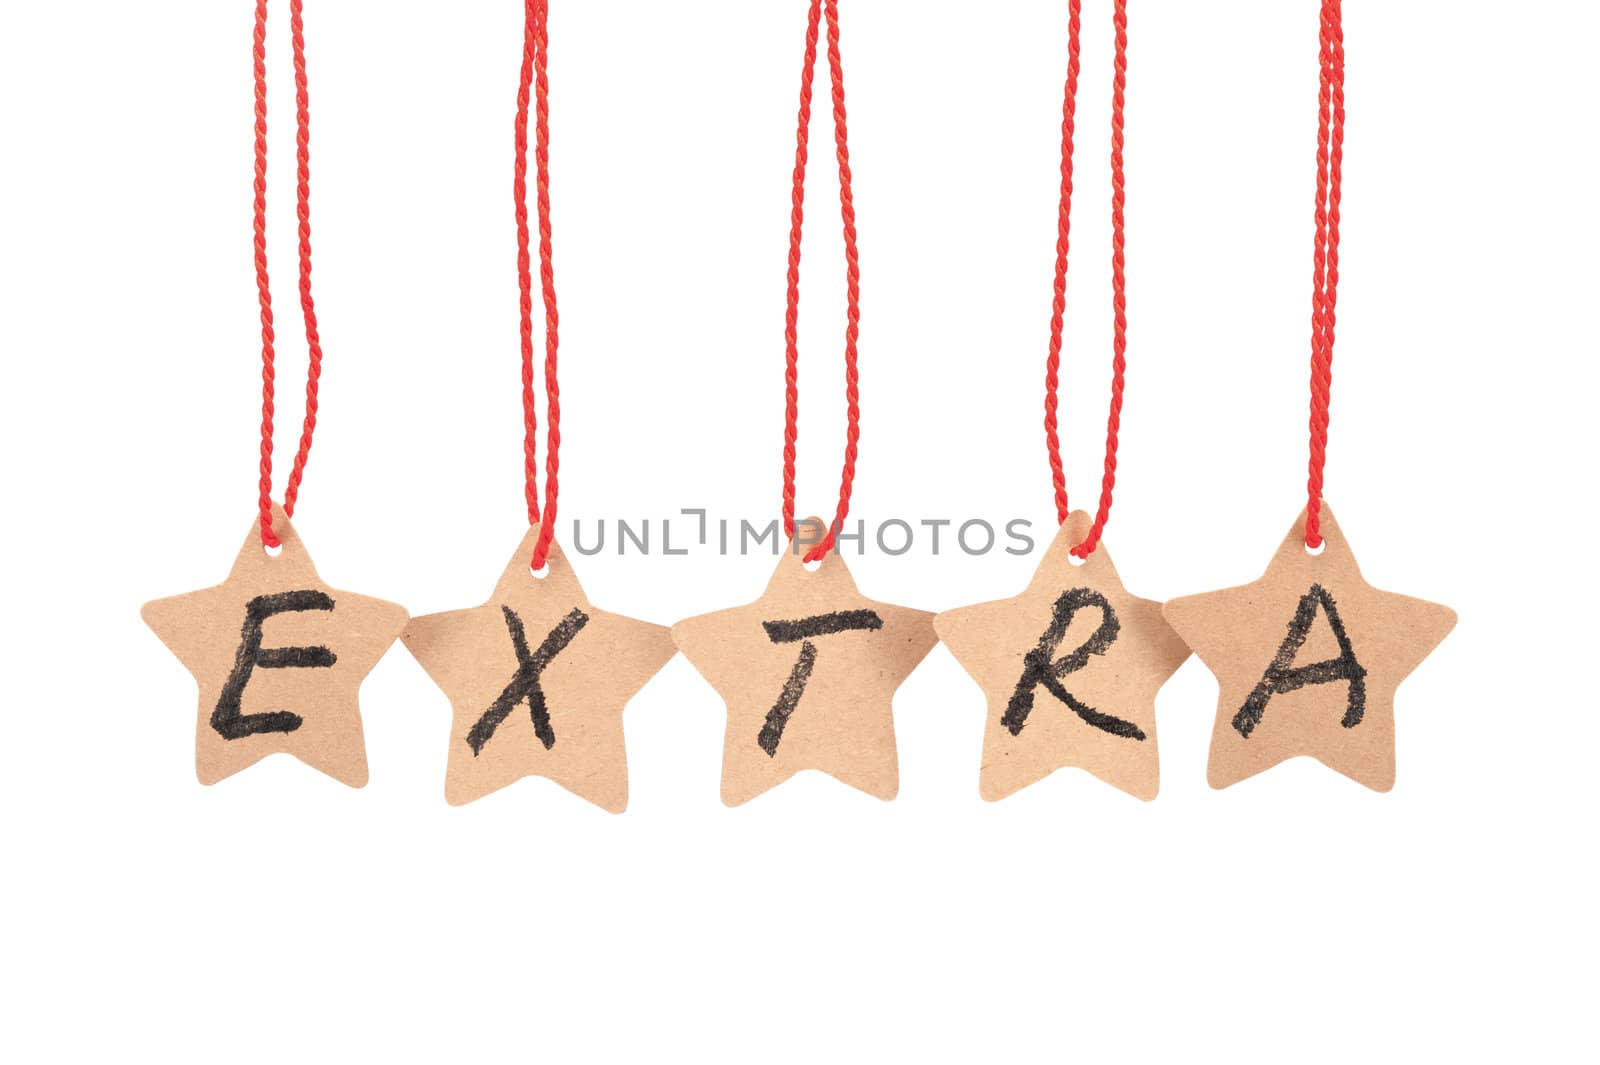 Extra spelled with paper stars  are hung by ropes, isolated against white background